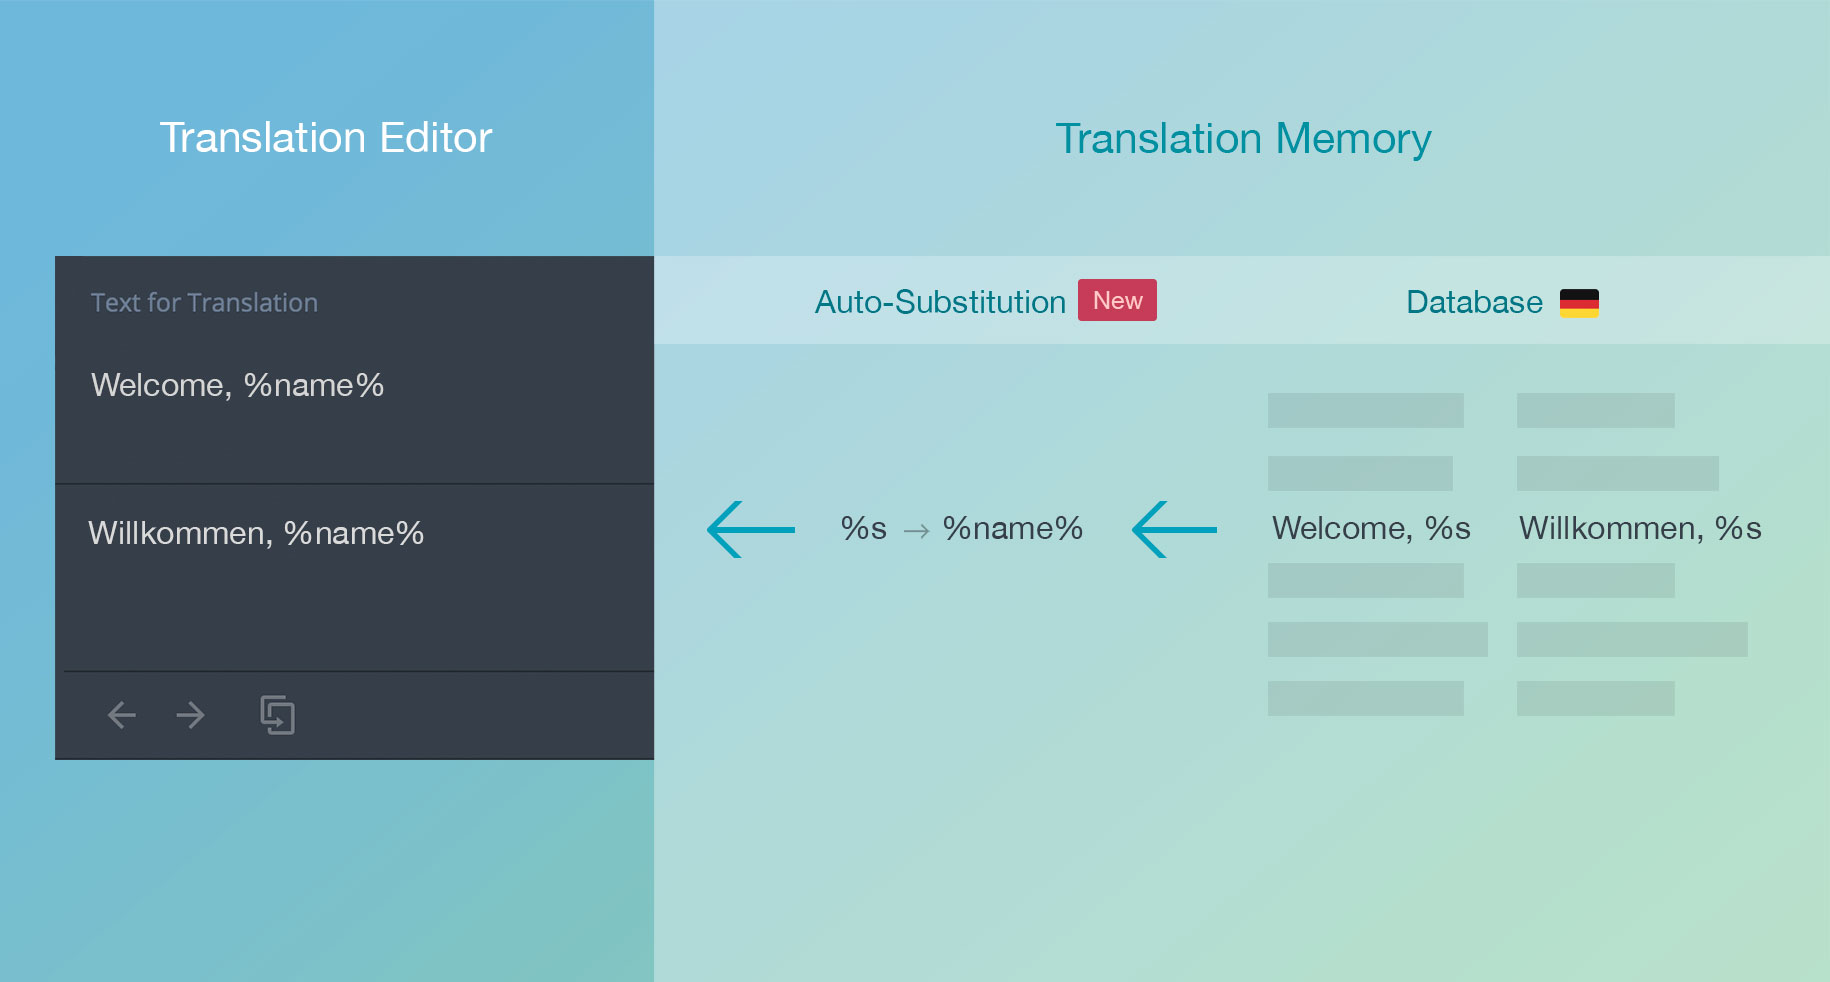 New feature: auto-substitution for non-translatable elements in TM